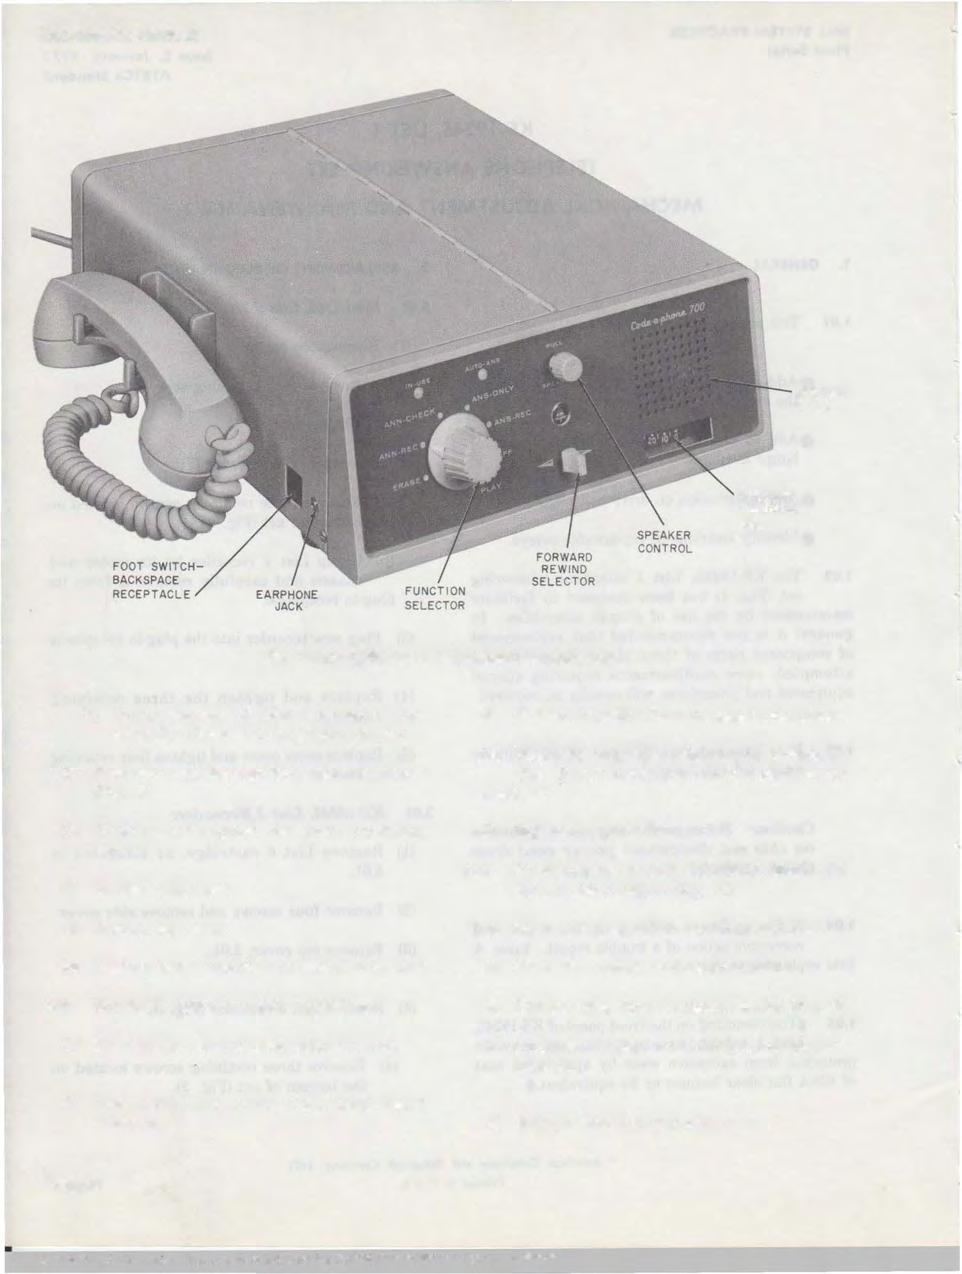 . SECTON 514-155-300 SPEAKER GRLL MESSAGE NDCATOR DAL Fig. 1-KS-19245 List 1 Telephone Answering Set (b) Grasp chassis of List 3 recorder and carefully withdraw from plug in receptacle.